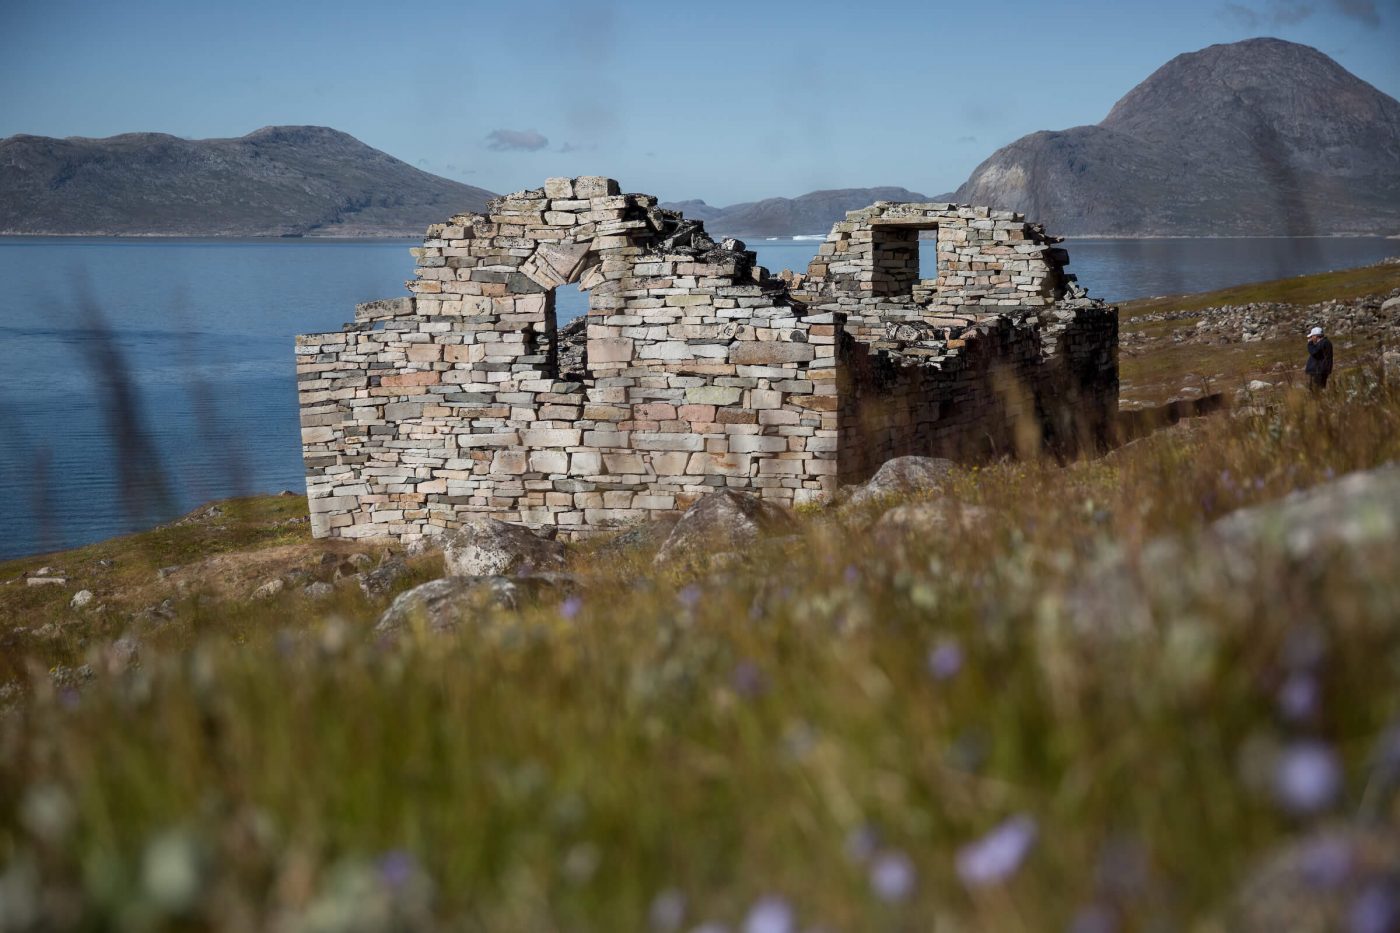 Hvalsey church ruin with flowers in the foreground in South Greenland, by Mads Pihl